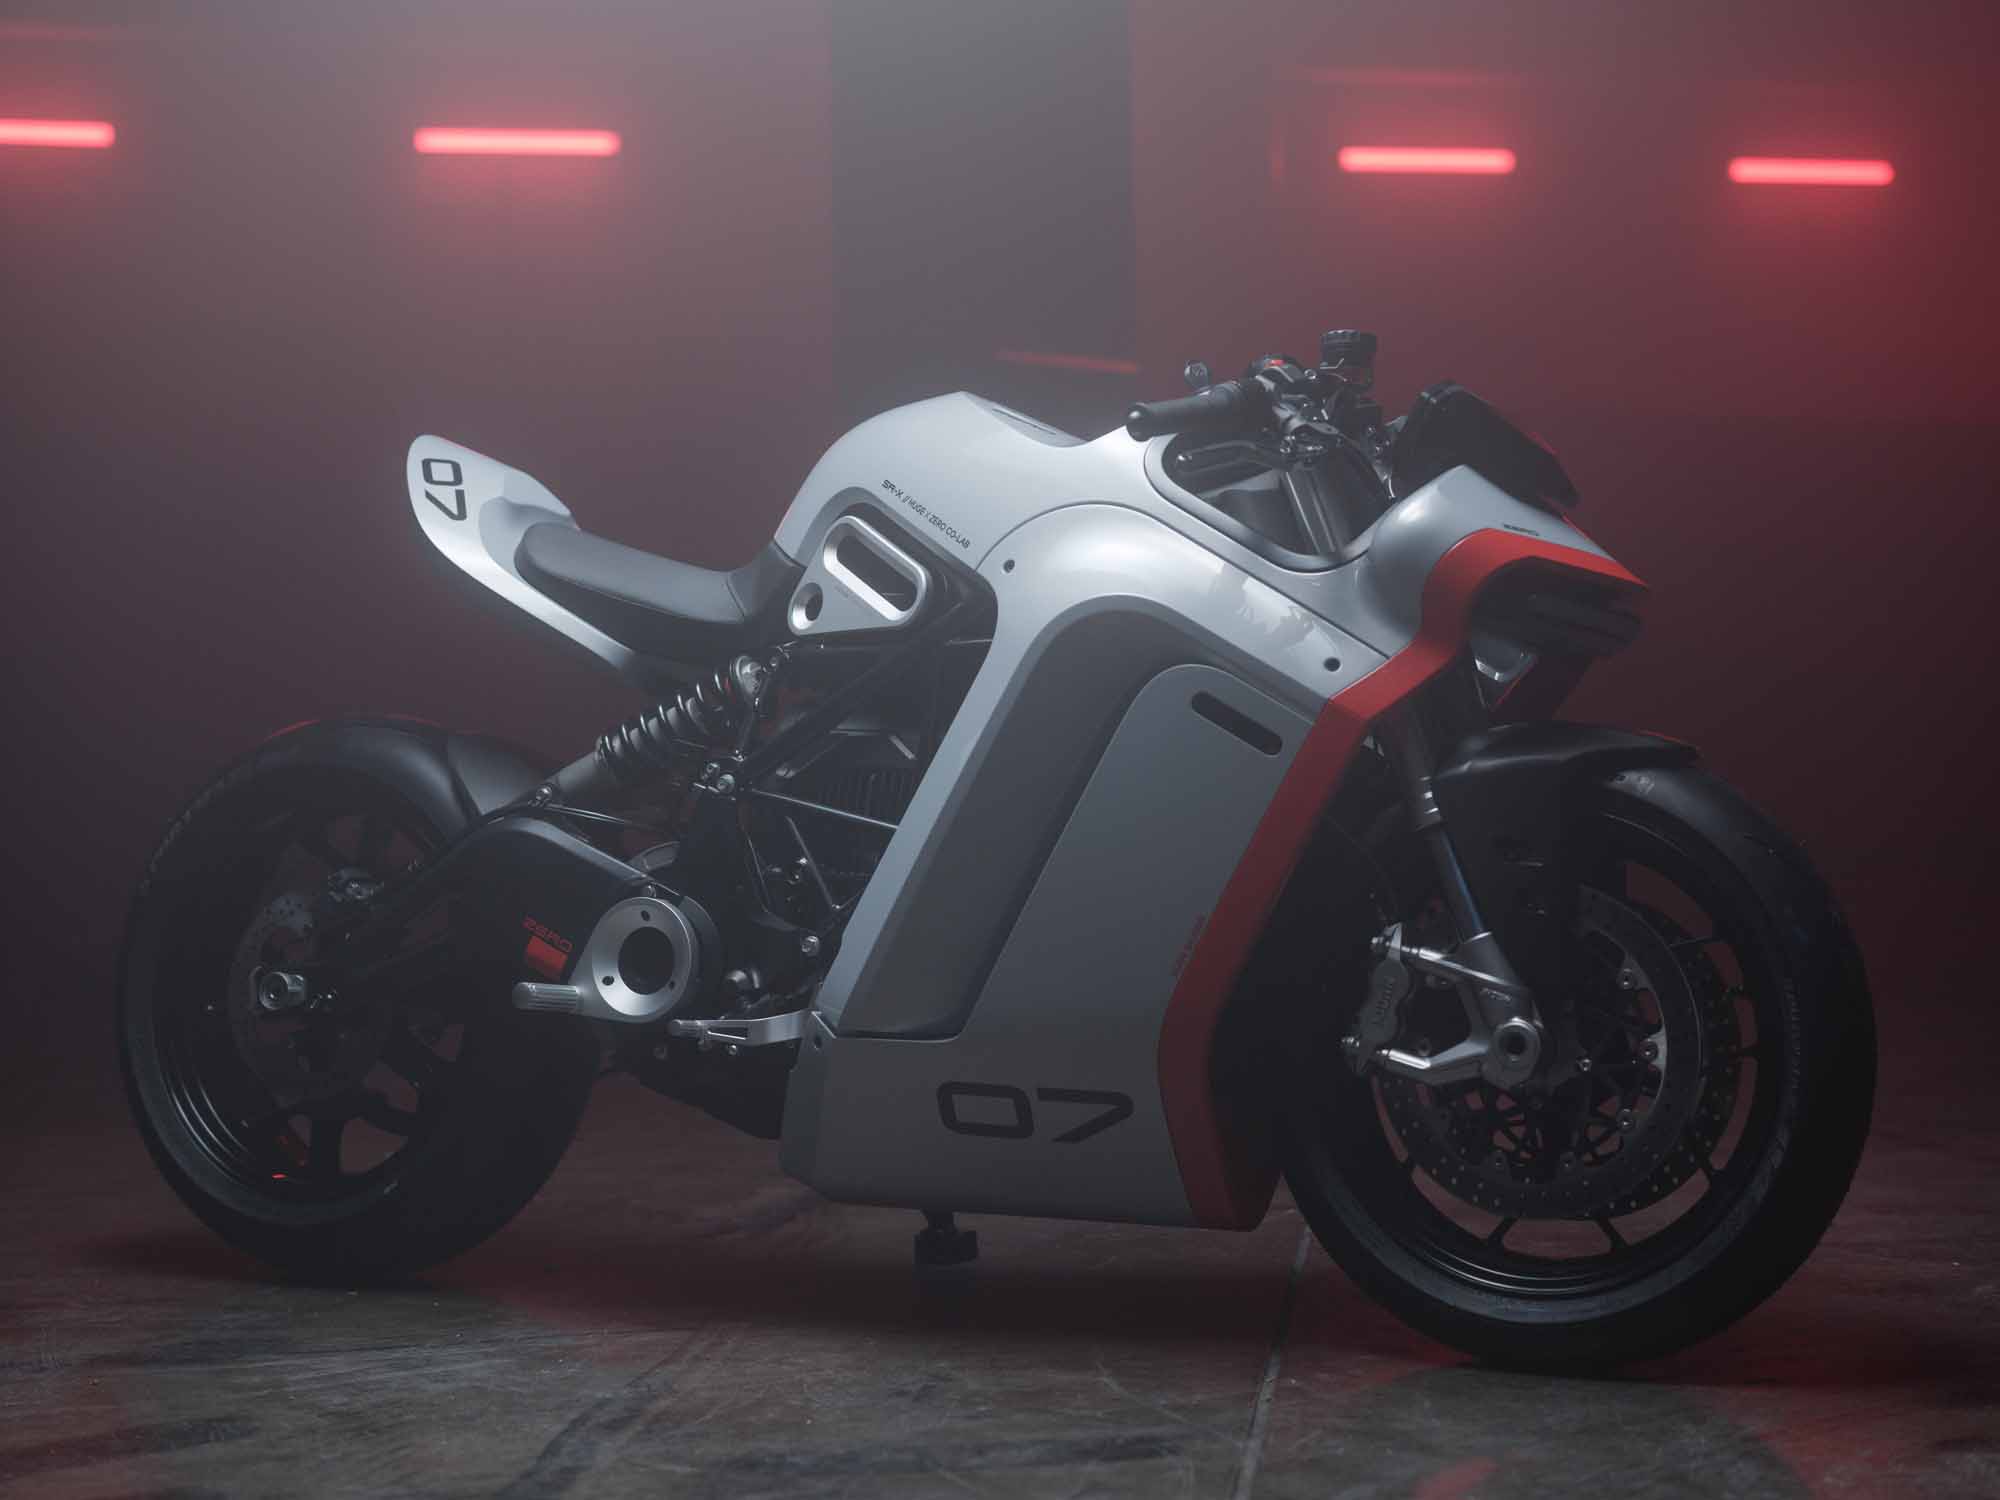 Zero Motorcycles and Huge Design unveil the innovative SR-X concept motorcycle